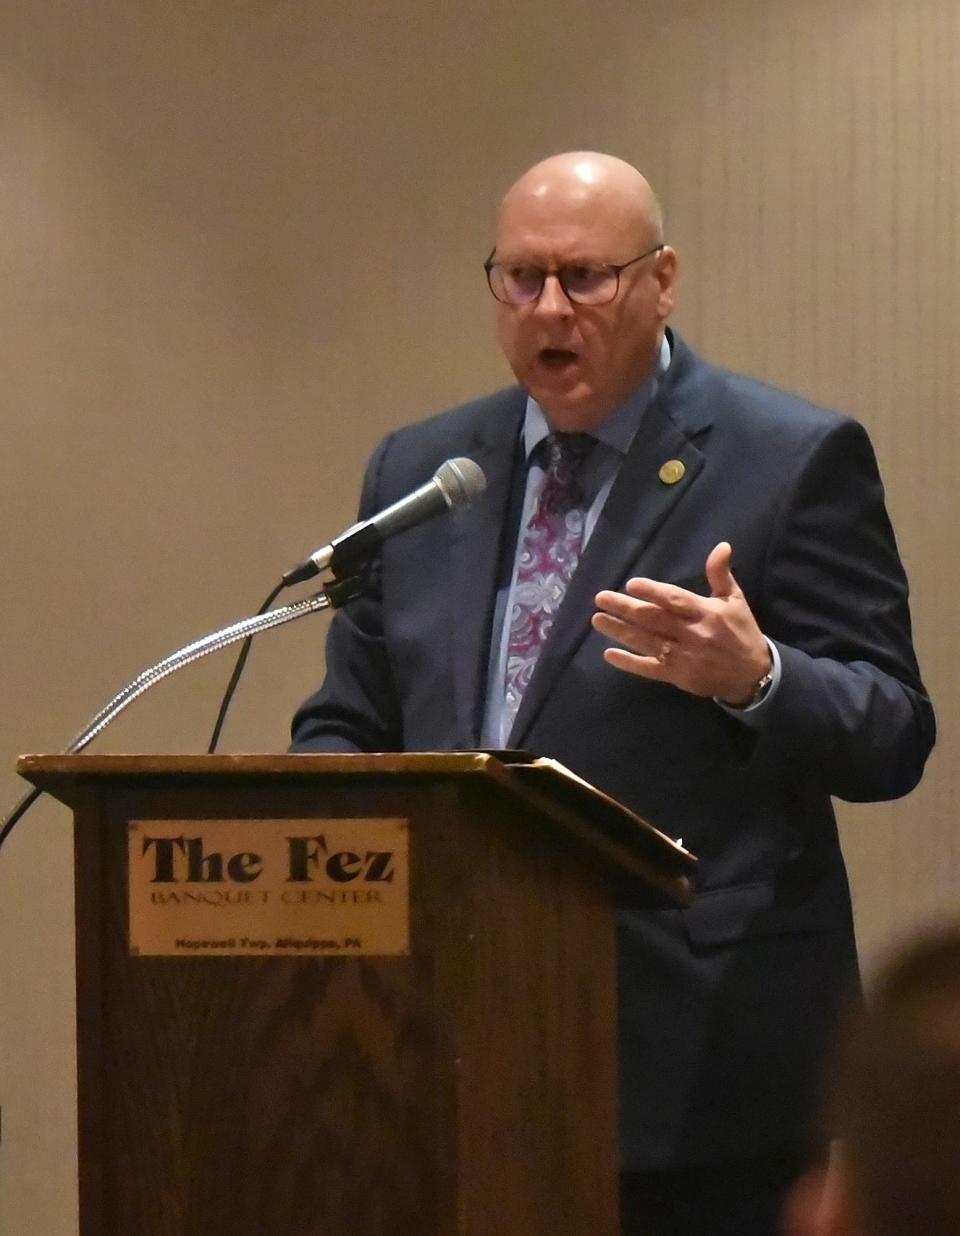 Beaver County Commissioner Jack Manning, who previously served as executive director of the Beaver County Chamber of Commerce from 2015 until becoming commissioner in January 2020.